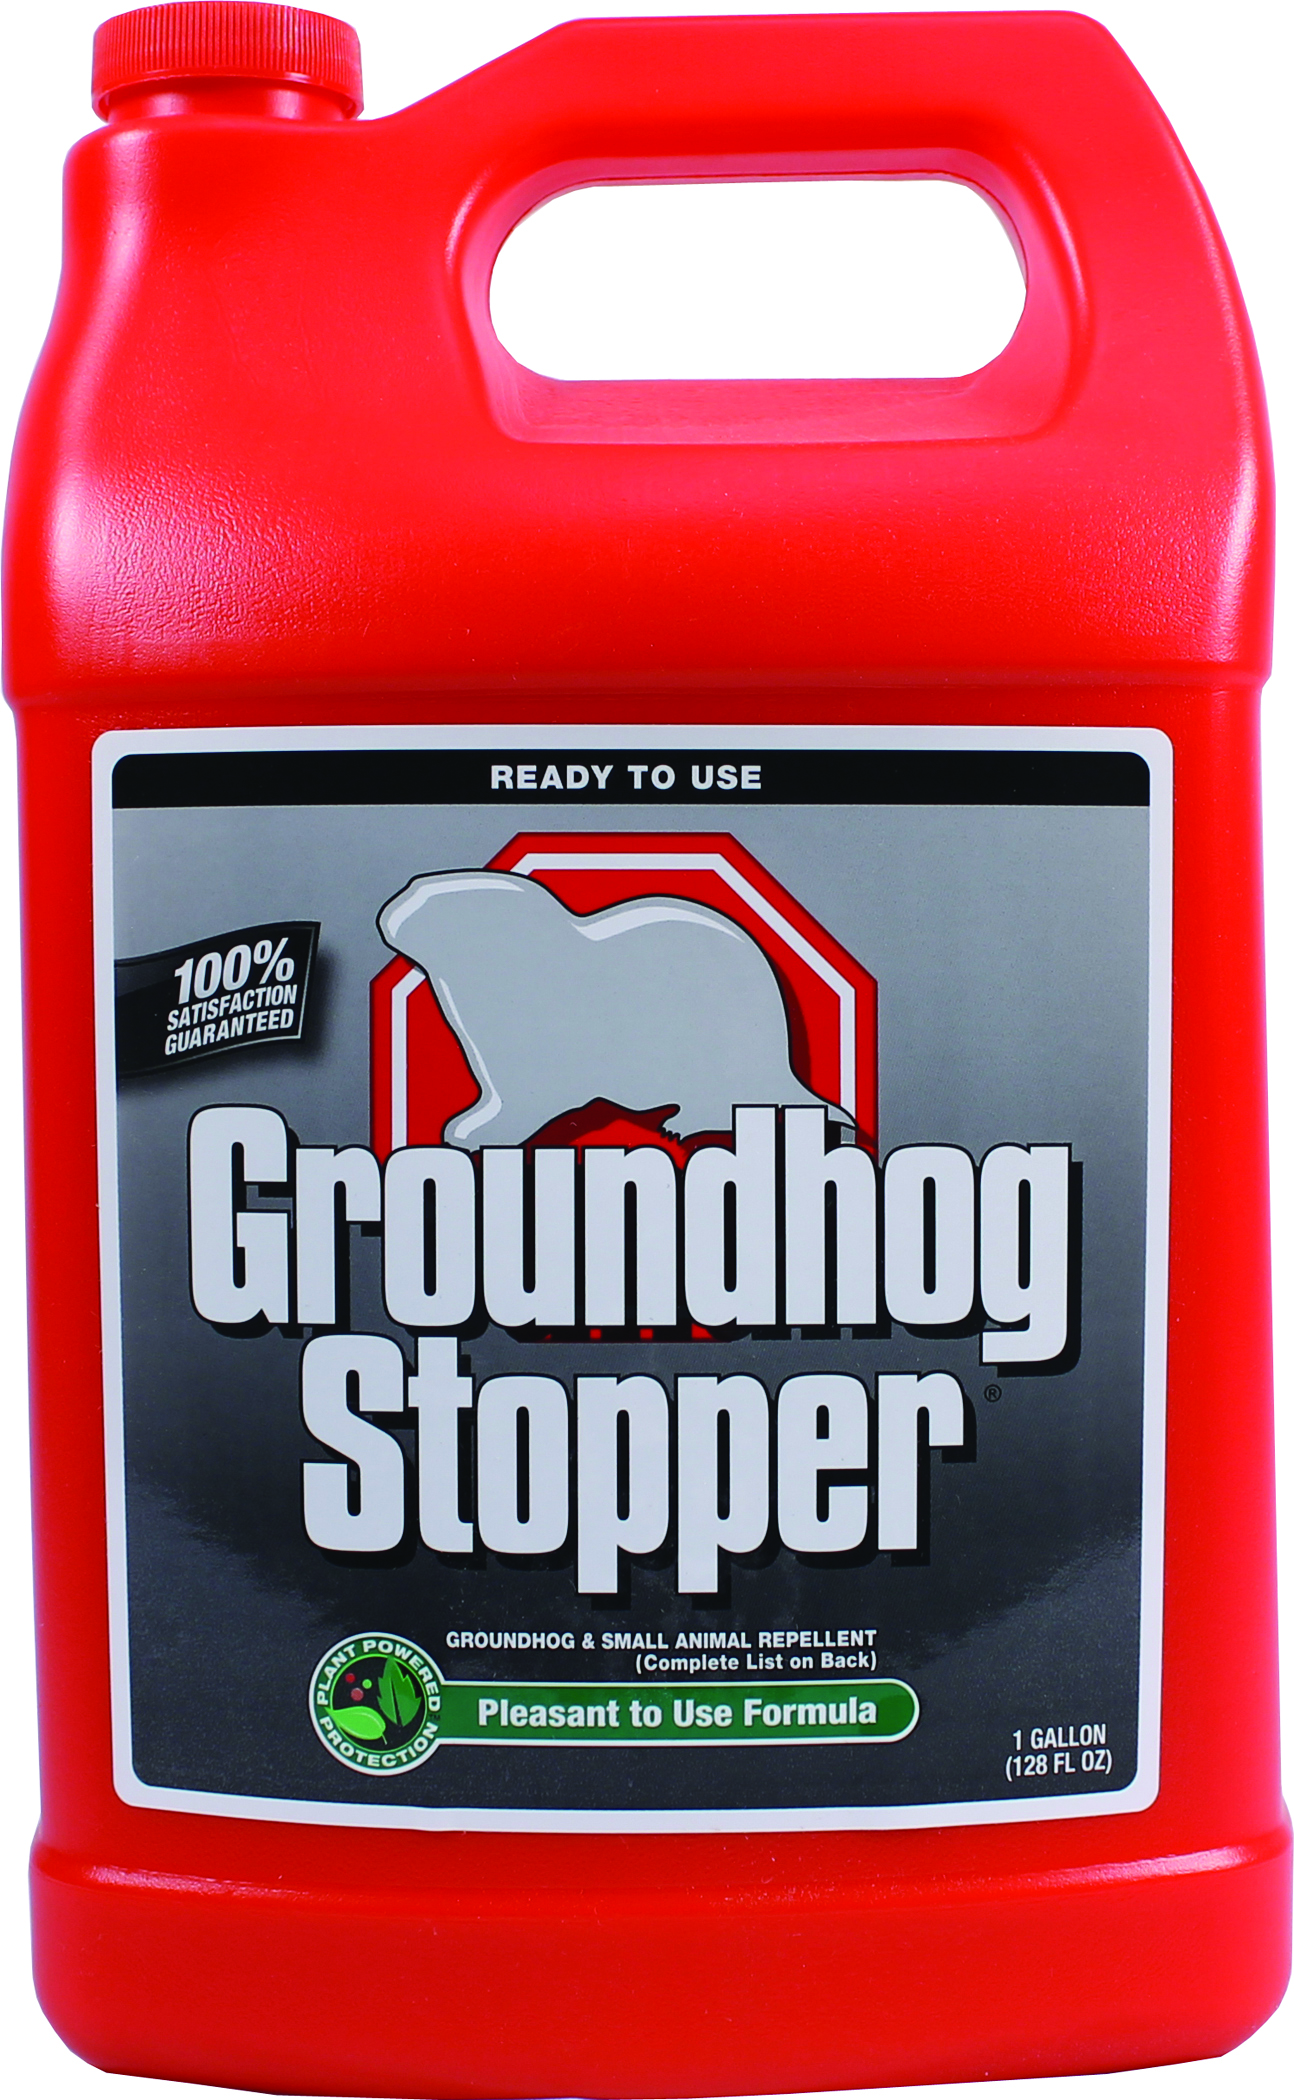 GROUNDHOG STOPPER READY TO USE REFILL